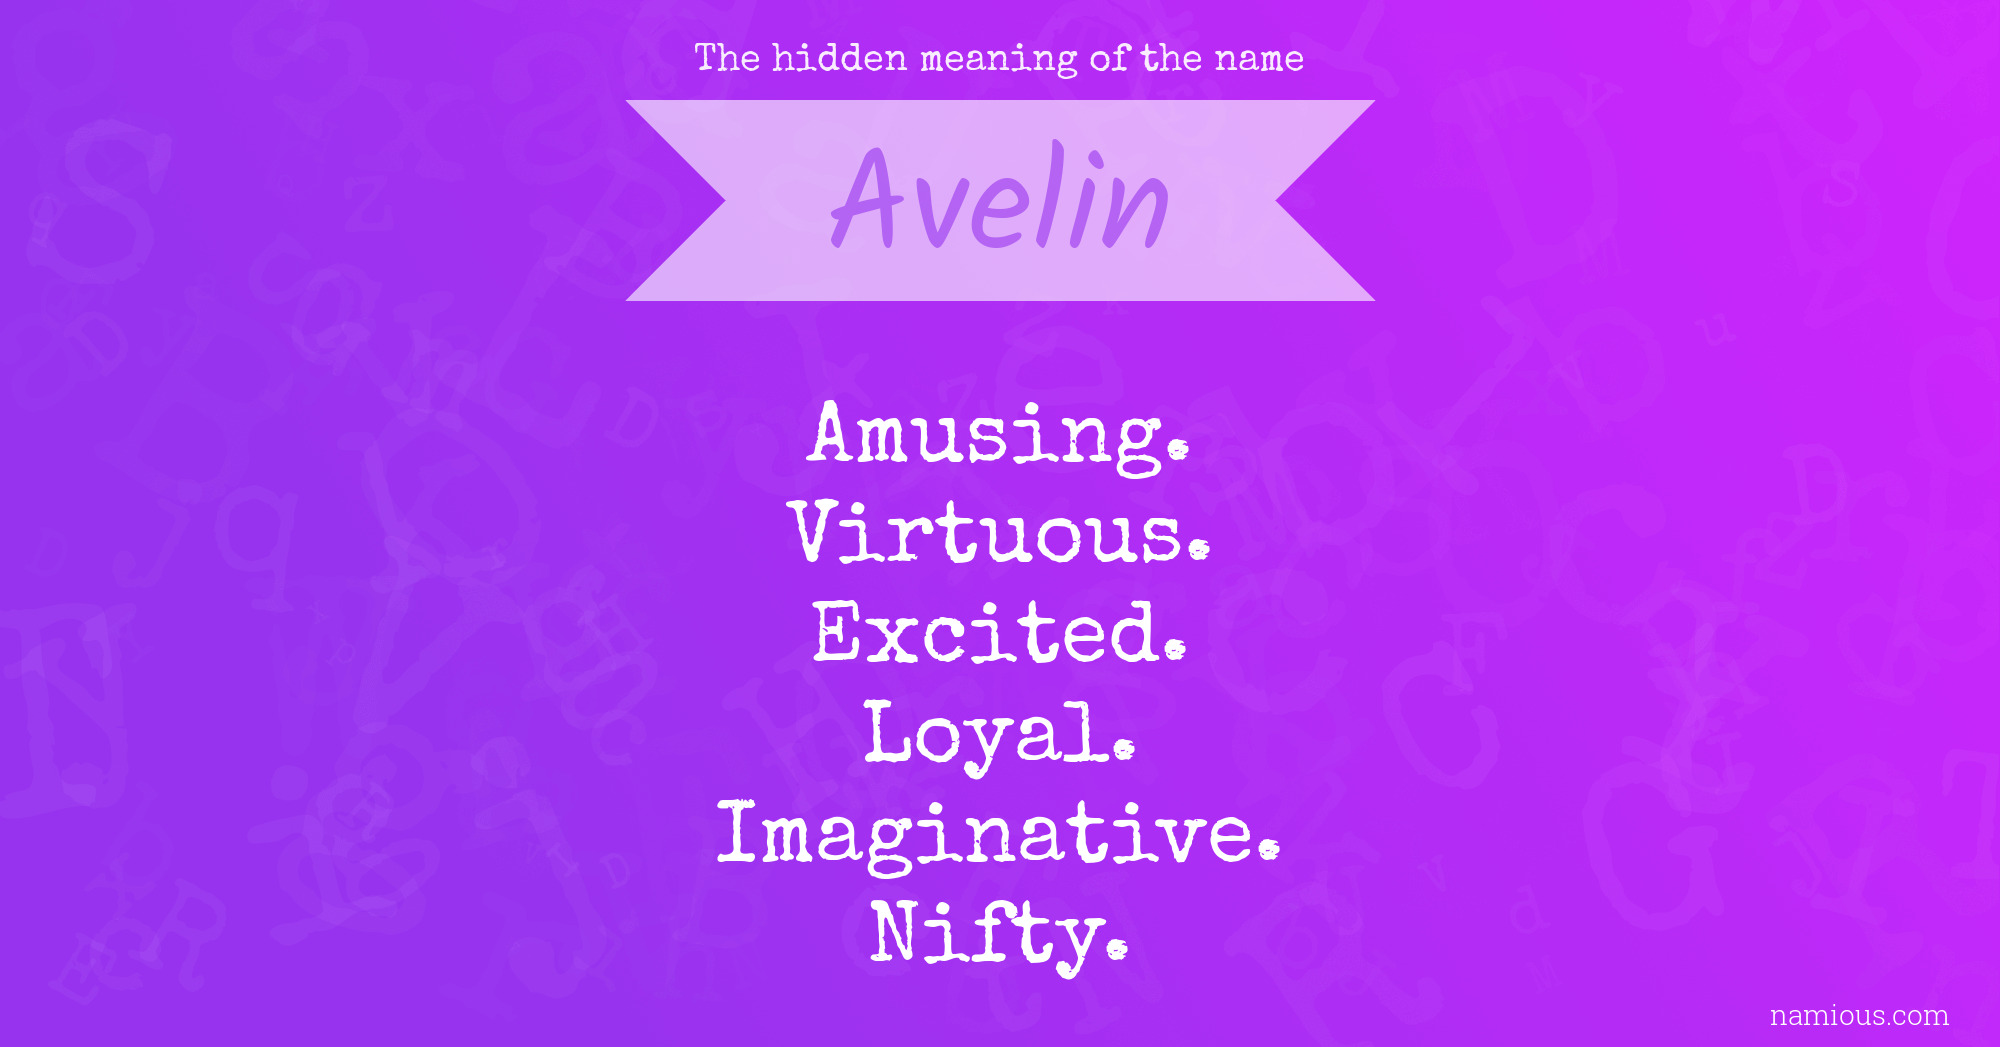 The hidden meaning of the name Avelin